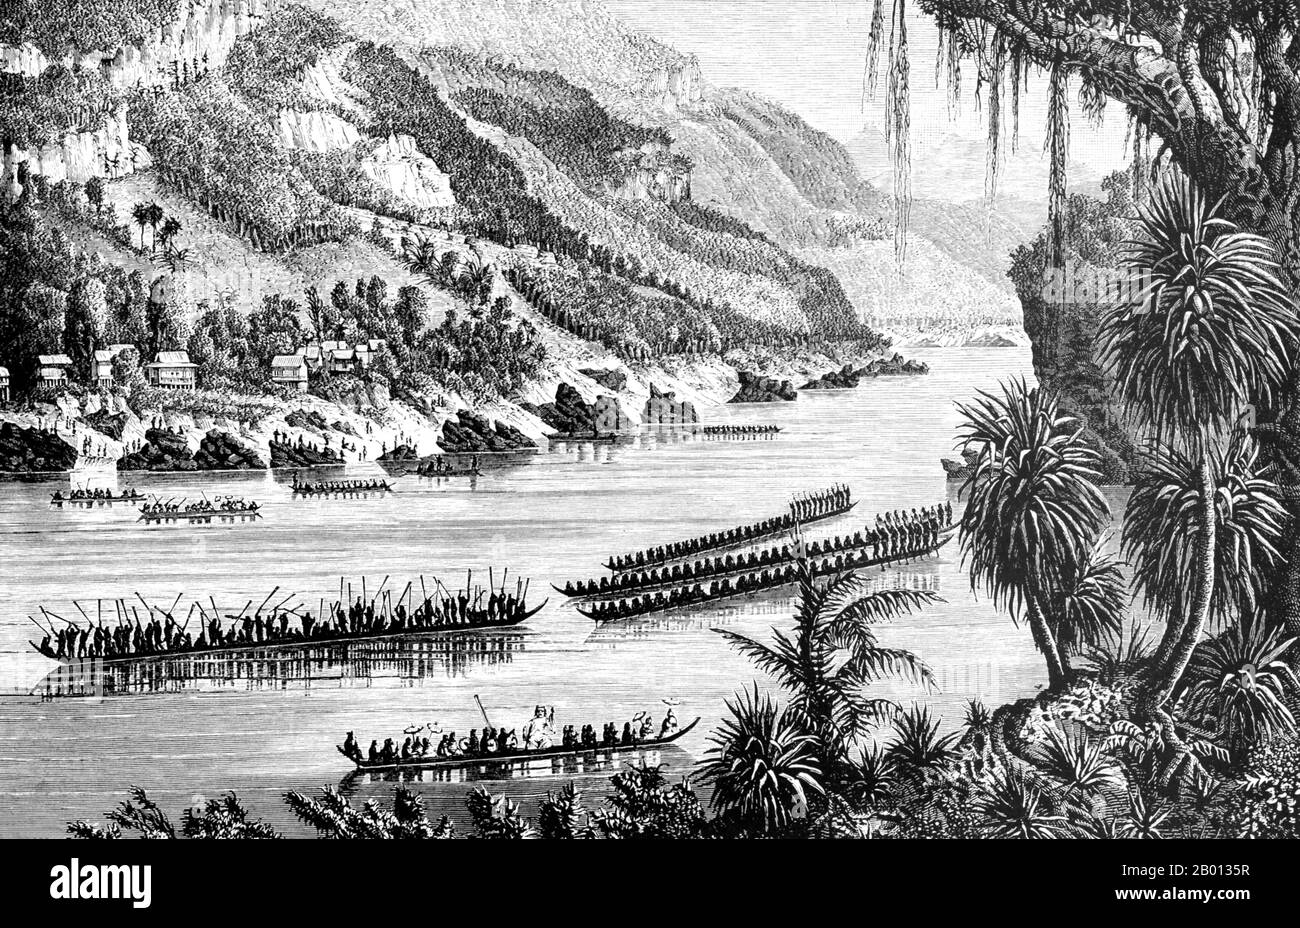 Cambodia: Pirogue boat races on the Mekong River. Engraving by Louis Delaporte (1842-1925), 1866-1868.  Accounts of pirogue races in Indochina date back to the Angkorian period when the Khmers under King Jayavarman VII triumphed over the Chams of Champa after a prolonged naval war (1177-81). Years later, French colonists witnessed boat races which are thought to be the forerunners of today's dragon boat and naga serpent boat racing. Nowadays, every November, millions of Cambodians descend on Phnom Penh for the three-day Bon Om Tuk Water Festival where the highlight is the dramatic boat races. Stock Photo